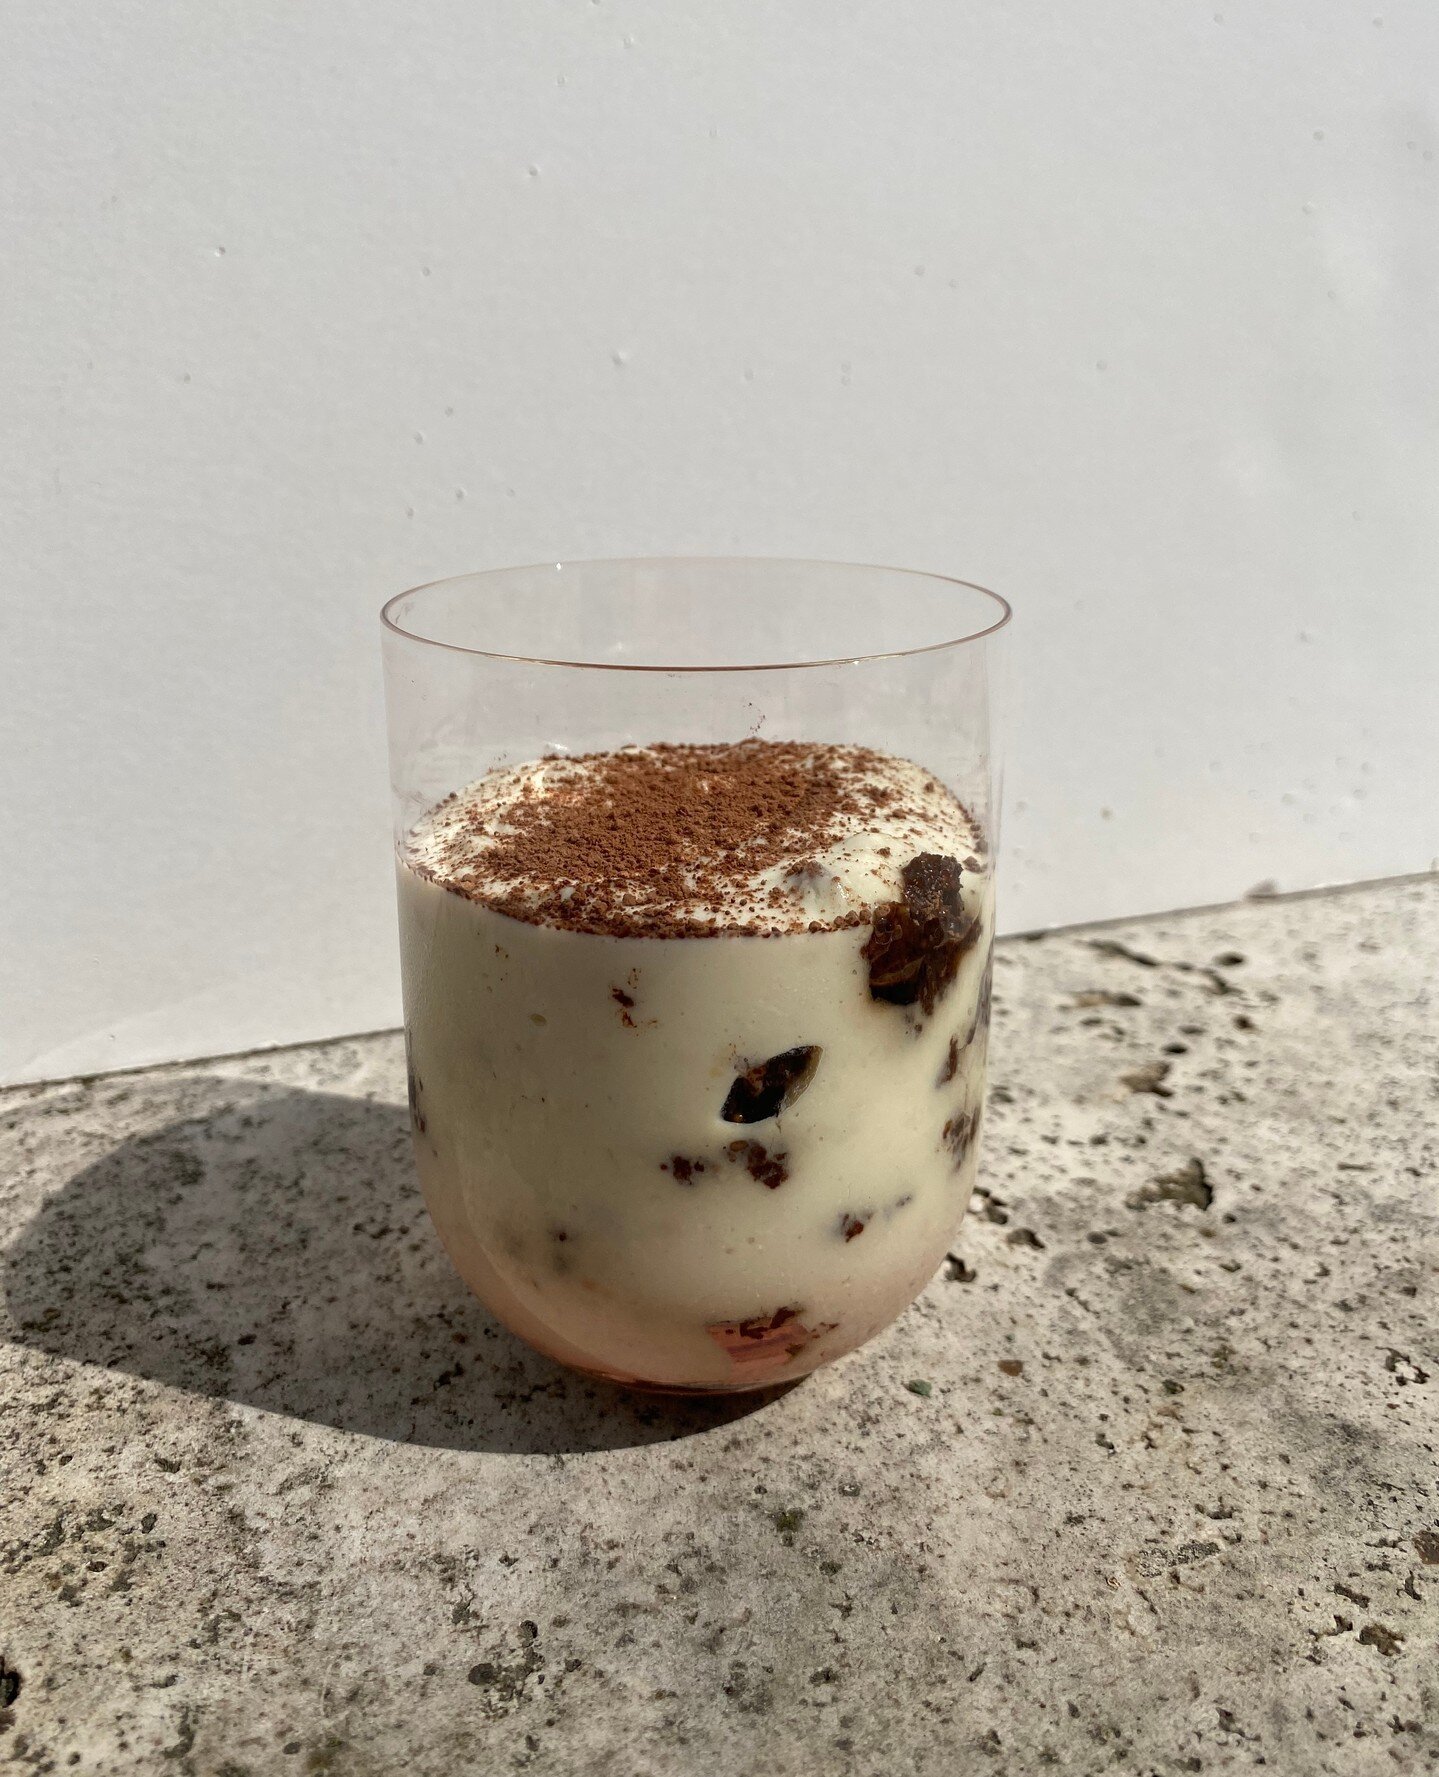 This was a challenge that I set with my colleague Pula, she makes the best ever authentic Tiramisu which is the talk of the office. For special occasions such as the birthdays of the bosses, she would make Tiramisu. As much as she was impressed with 